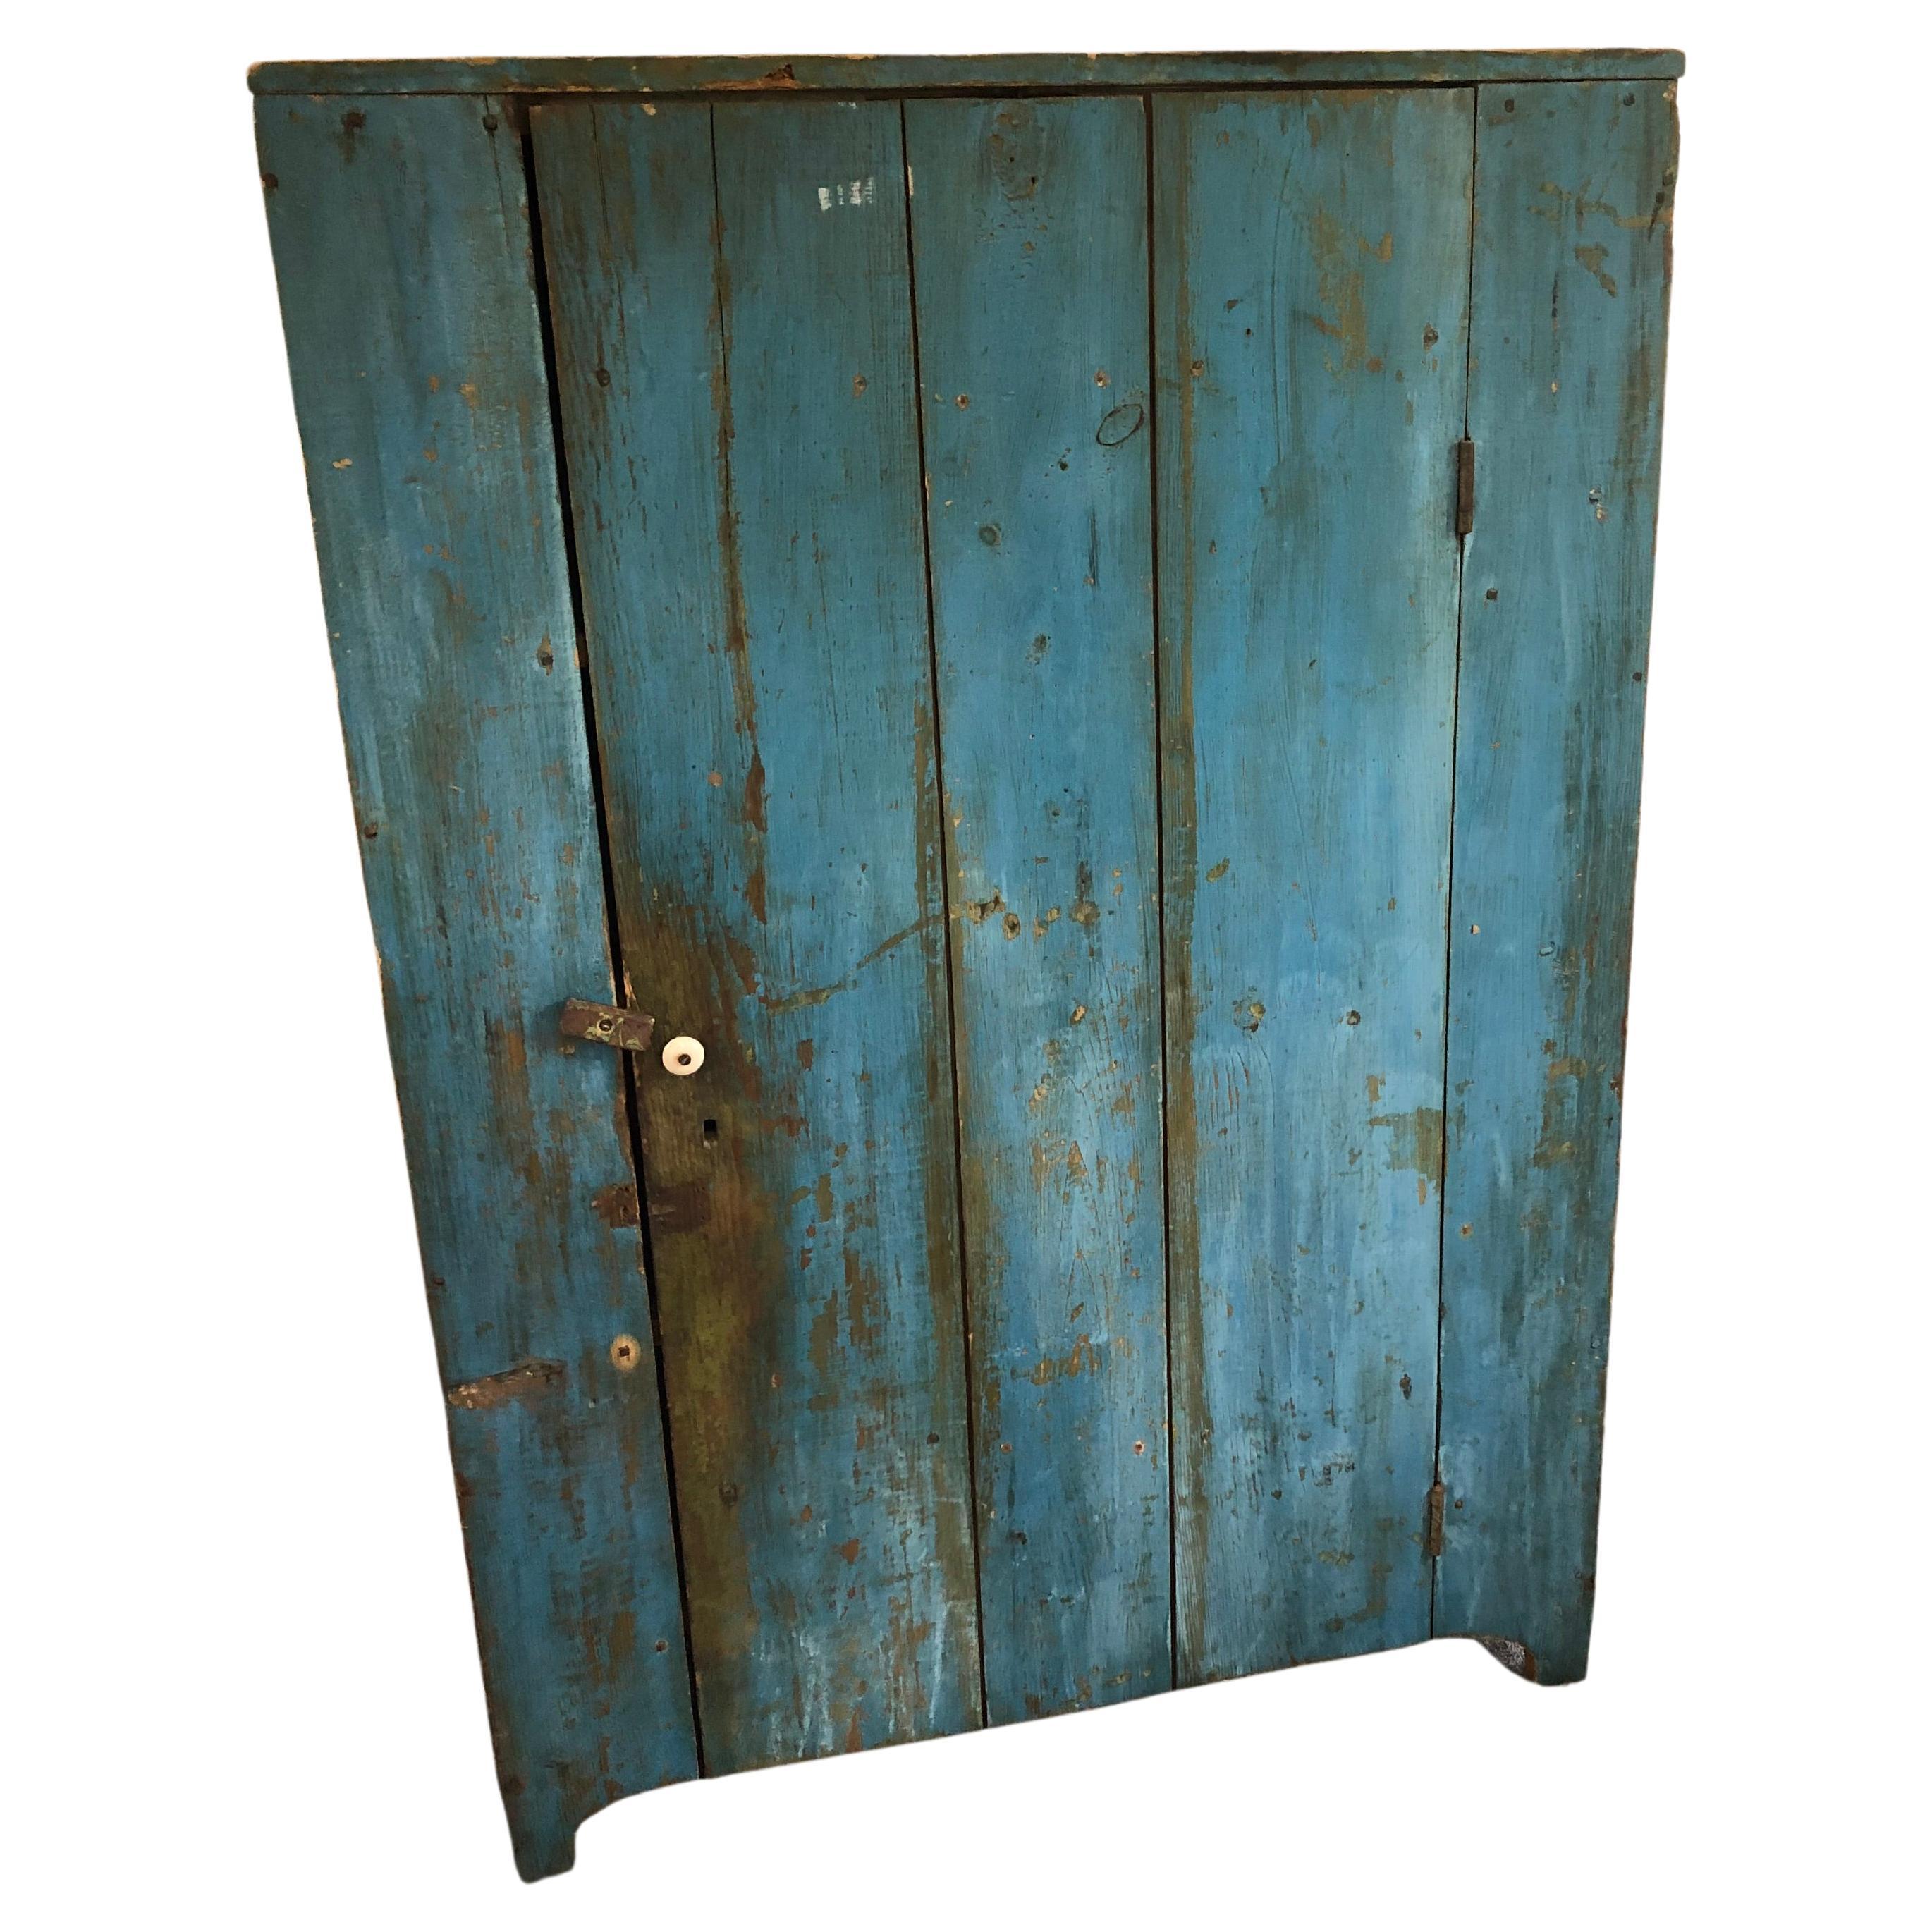 Charming Turquoise Painted Distressed Primitive Antique Cupboard